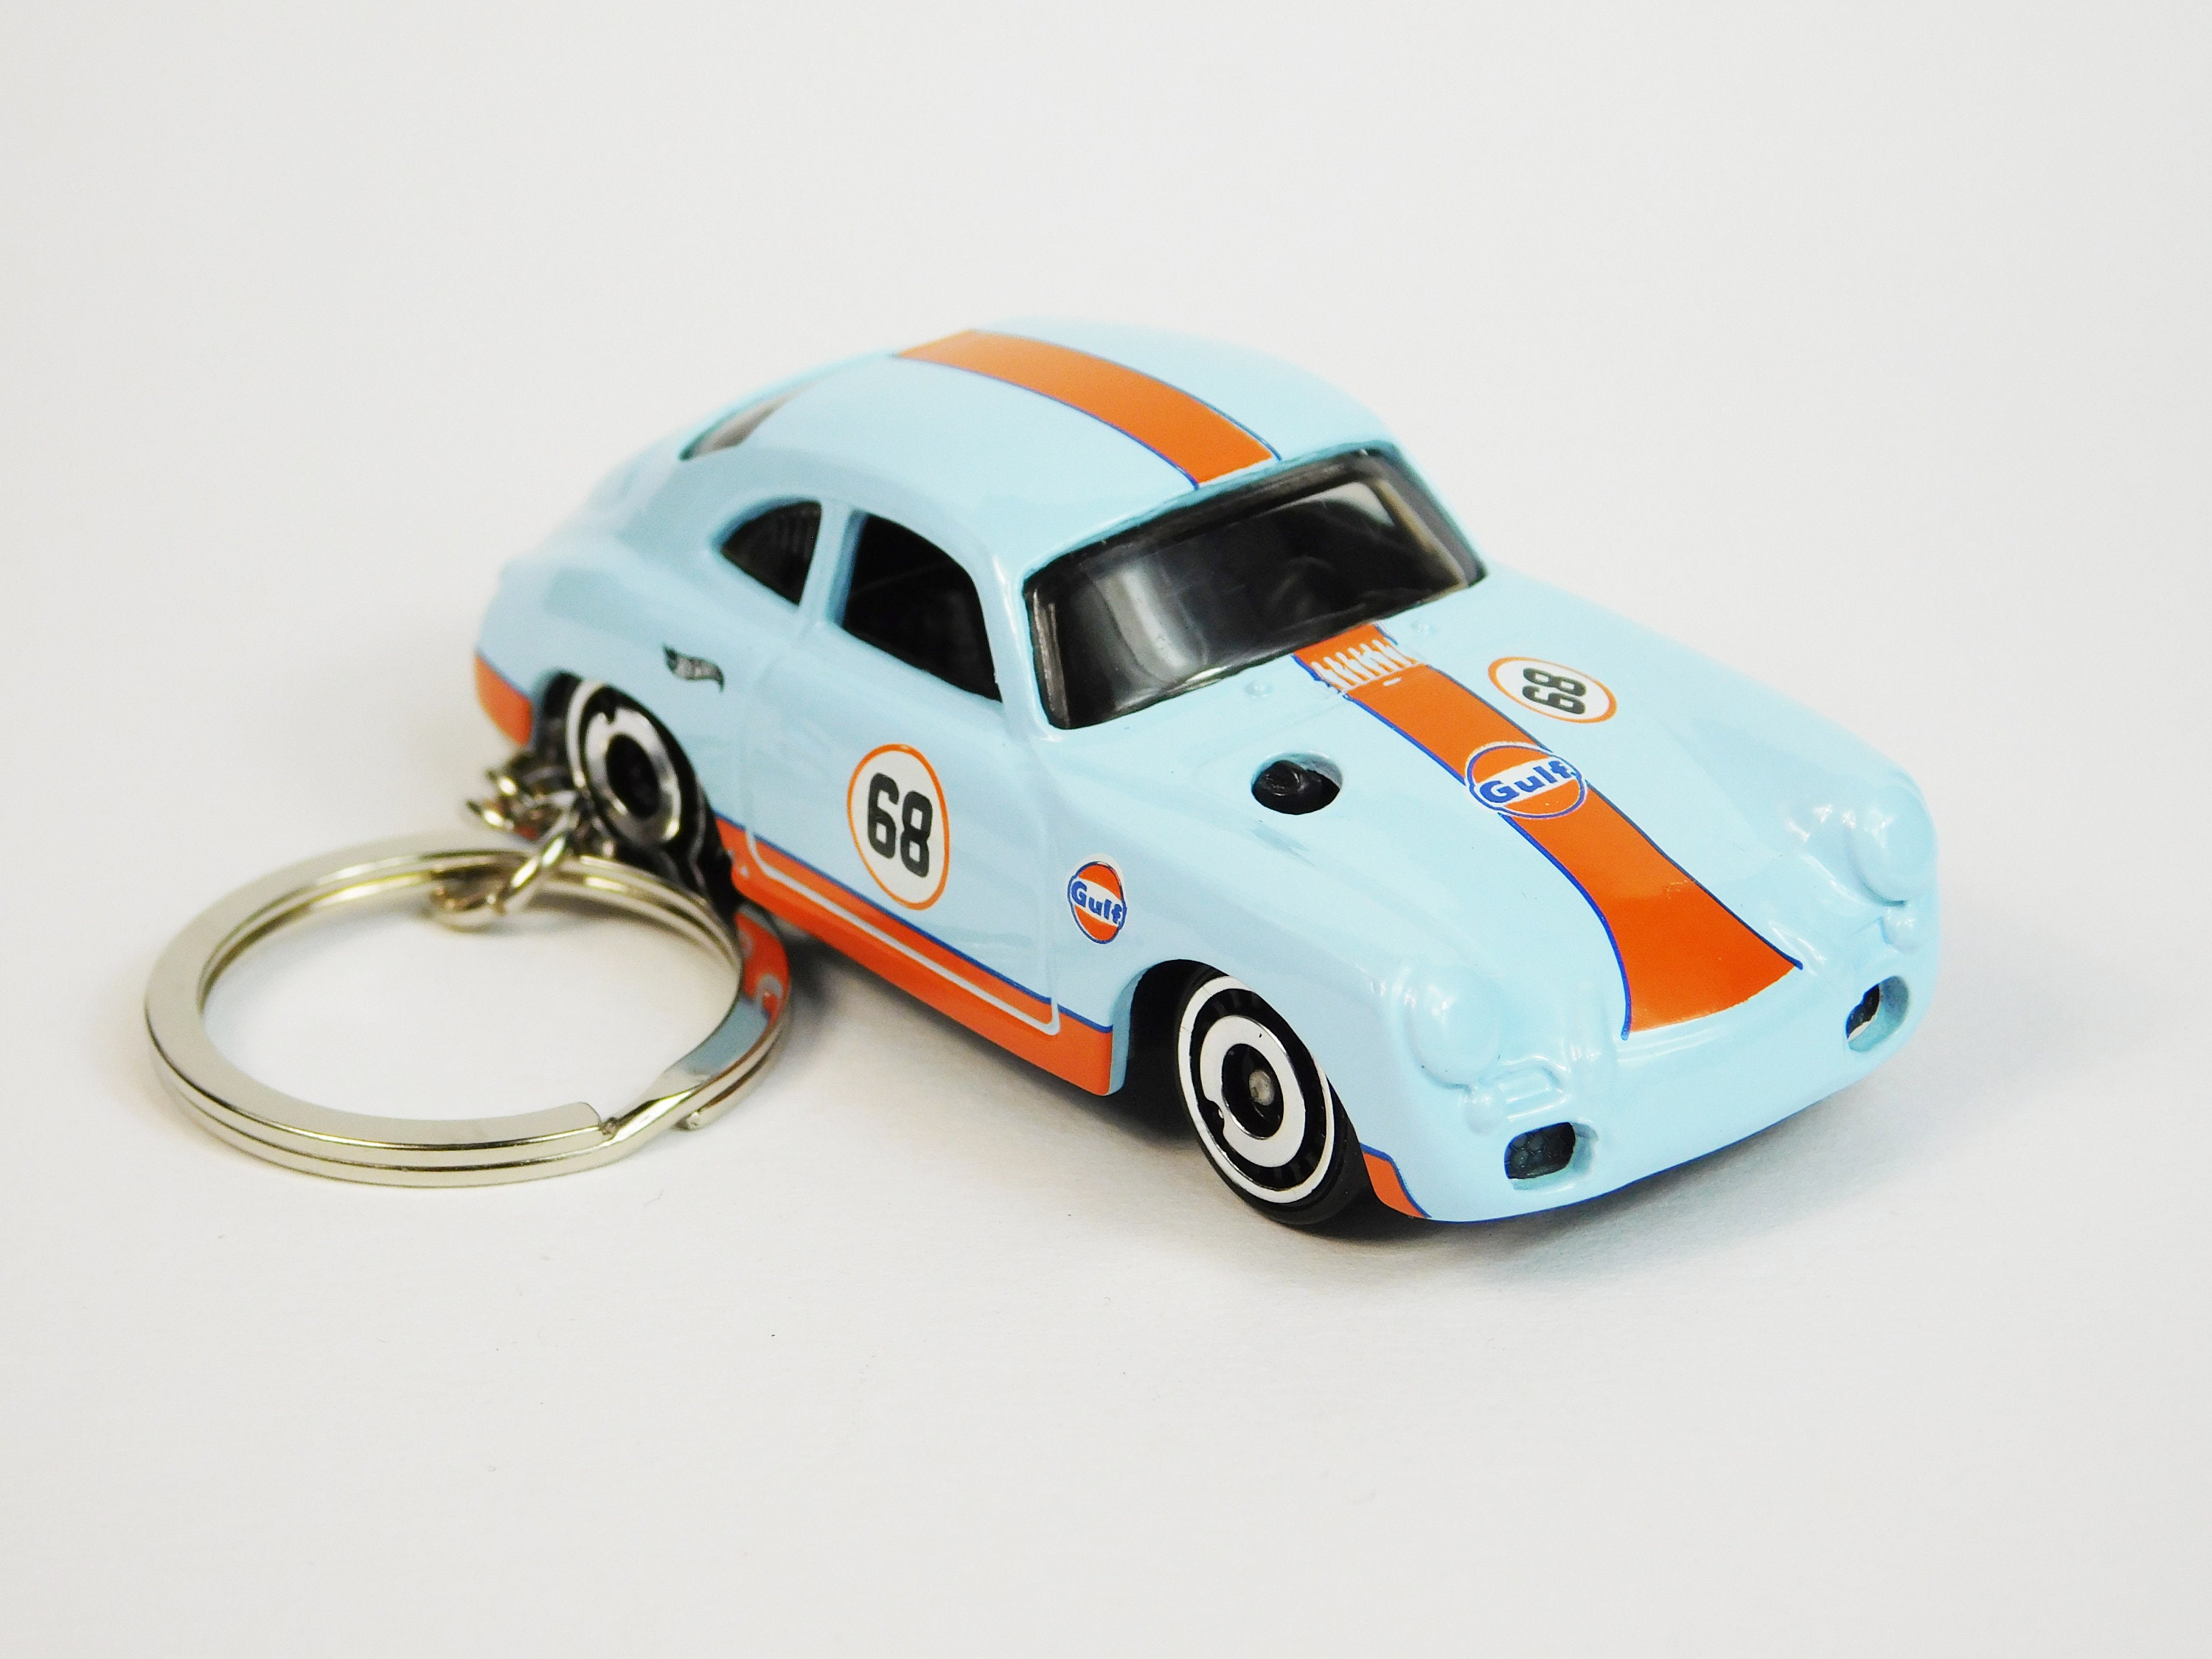 WORLDWIDE shipping with tracking number /Hot Wheels v.2 Porsche 356 Outlaw Gulf Keychain Same Day Gift SHIPPING .